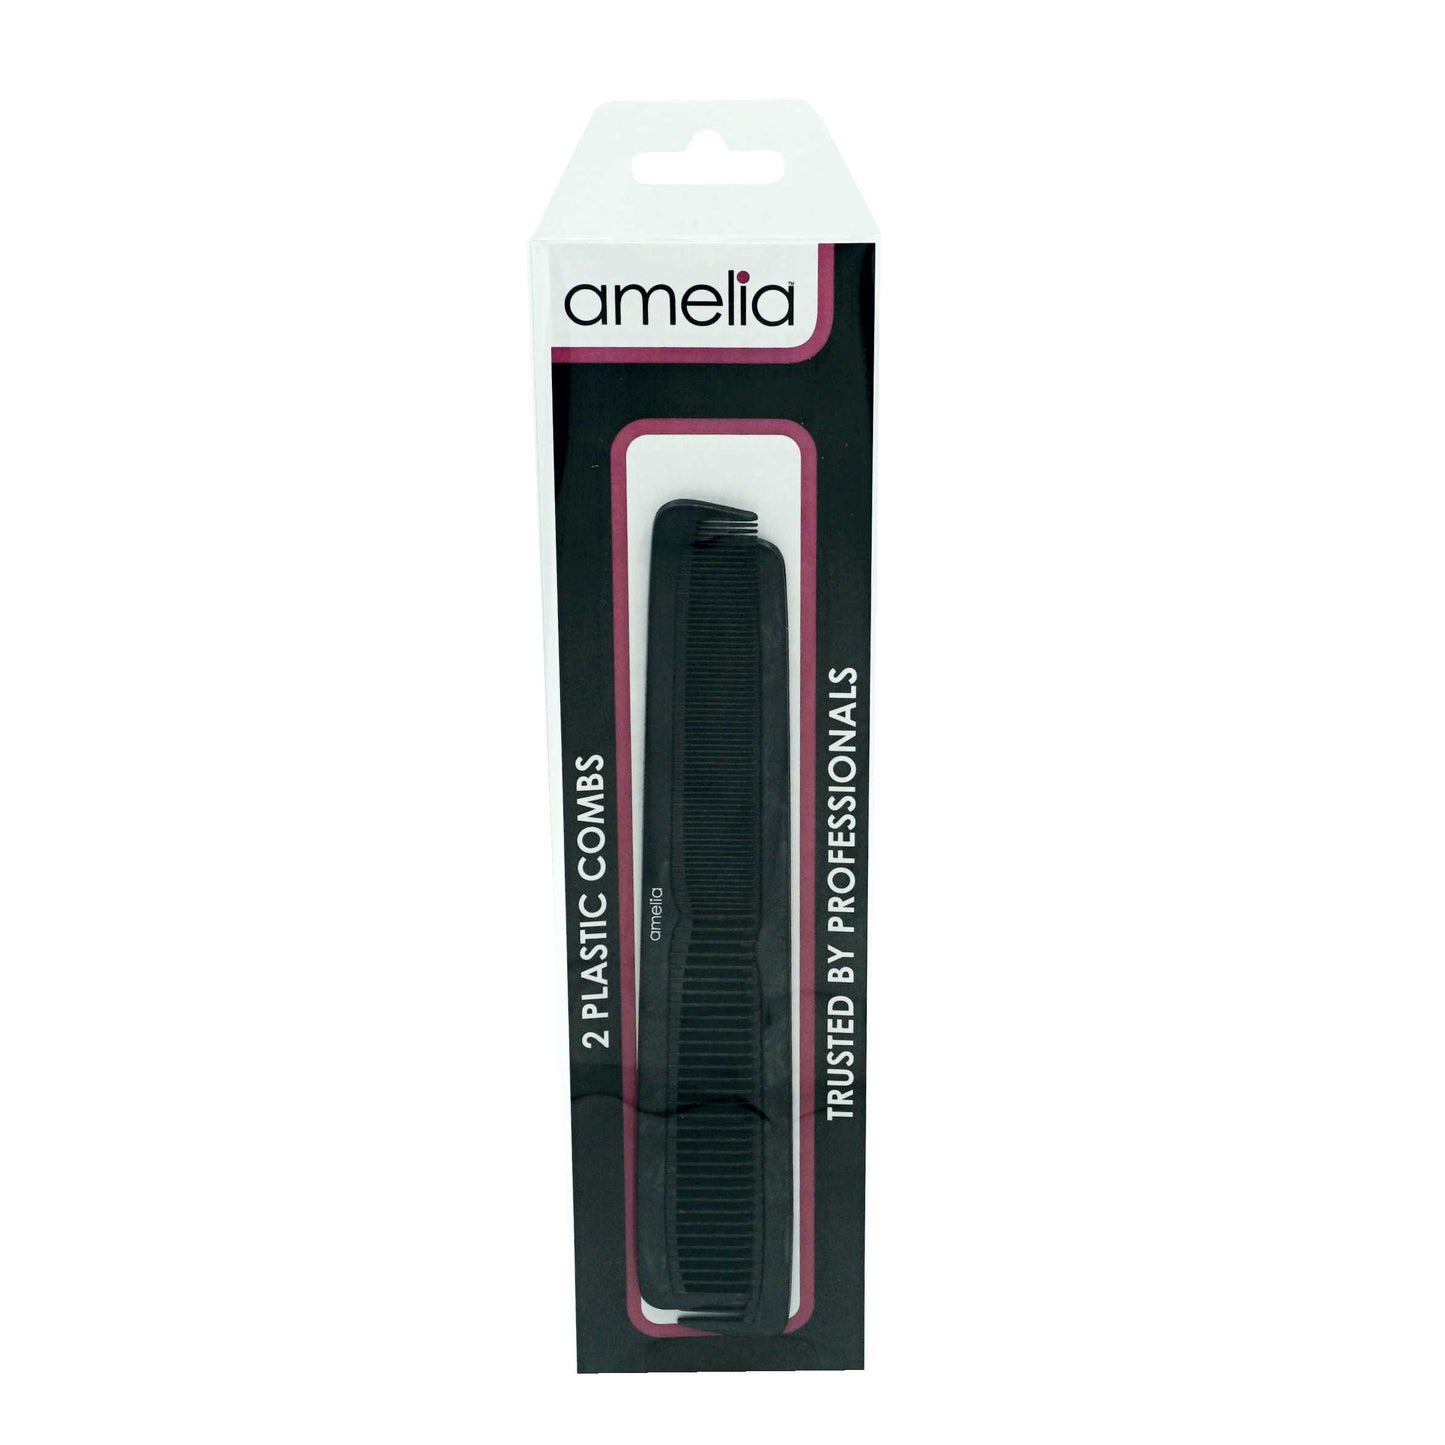 Amelia Beauty, 7in Black Plastic Styling Comb with Inch Marks, Made in USA, Professional Grade Hair Comb, Portable Salon Barber Shop Everyday Styling Cutting Hair Styling Tool, 7"x1.25", 2 Pack